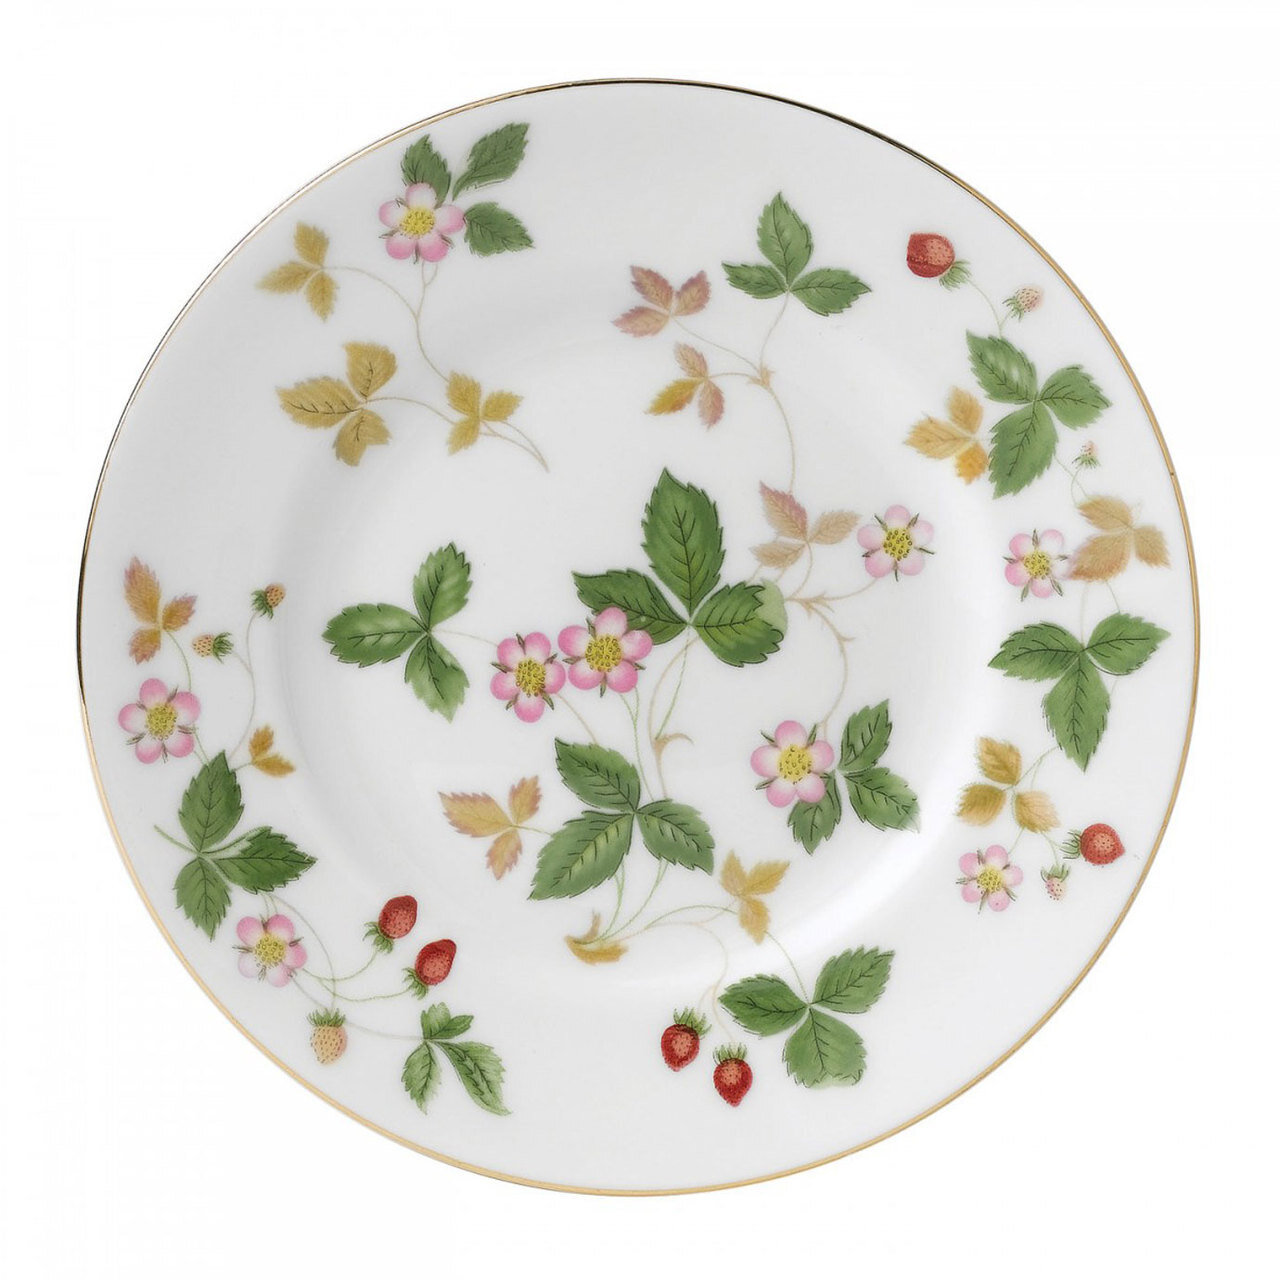 Wedgwood Wild Strawberry Bread and Butter Plate 6 Inch